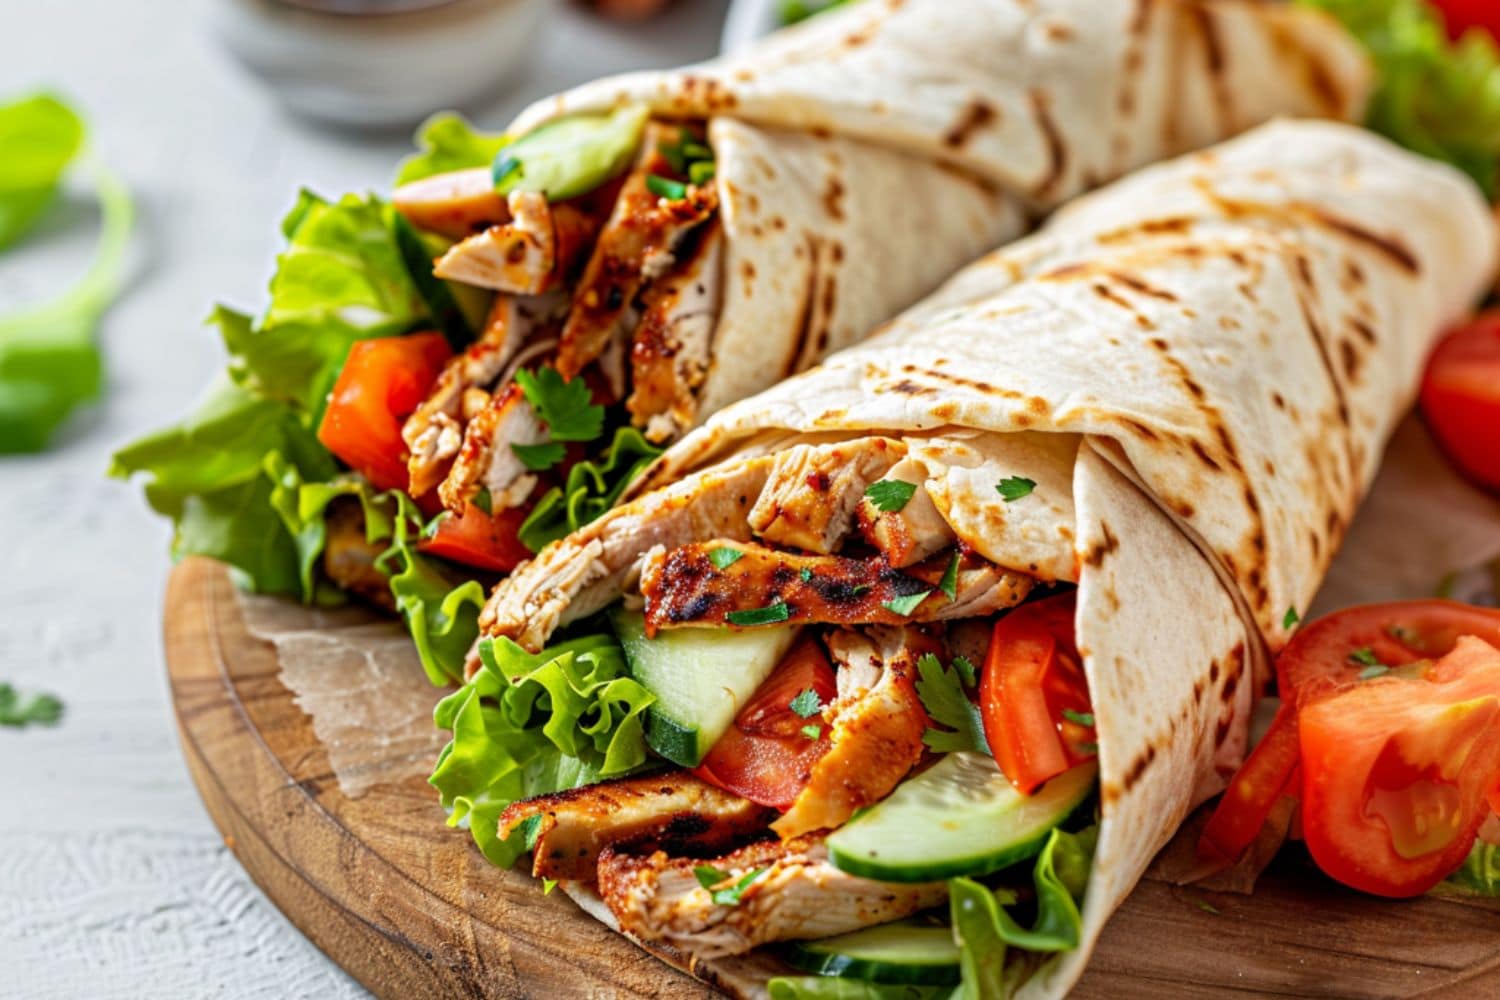 Chicken shawarma wrap with baked chicken, lettuce, tomatoes and cucumber.